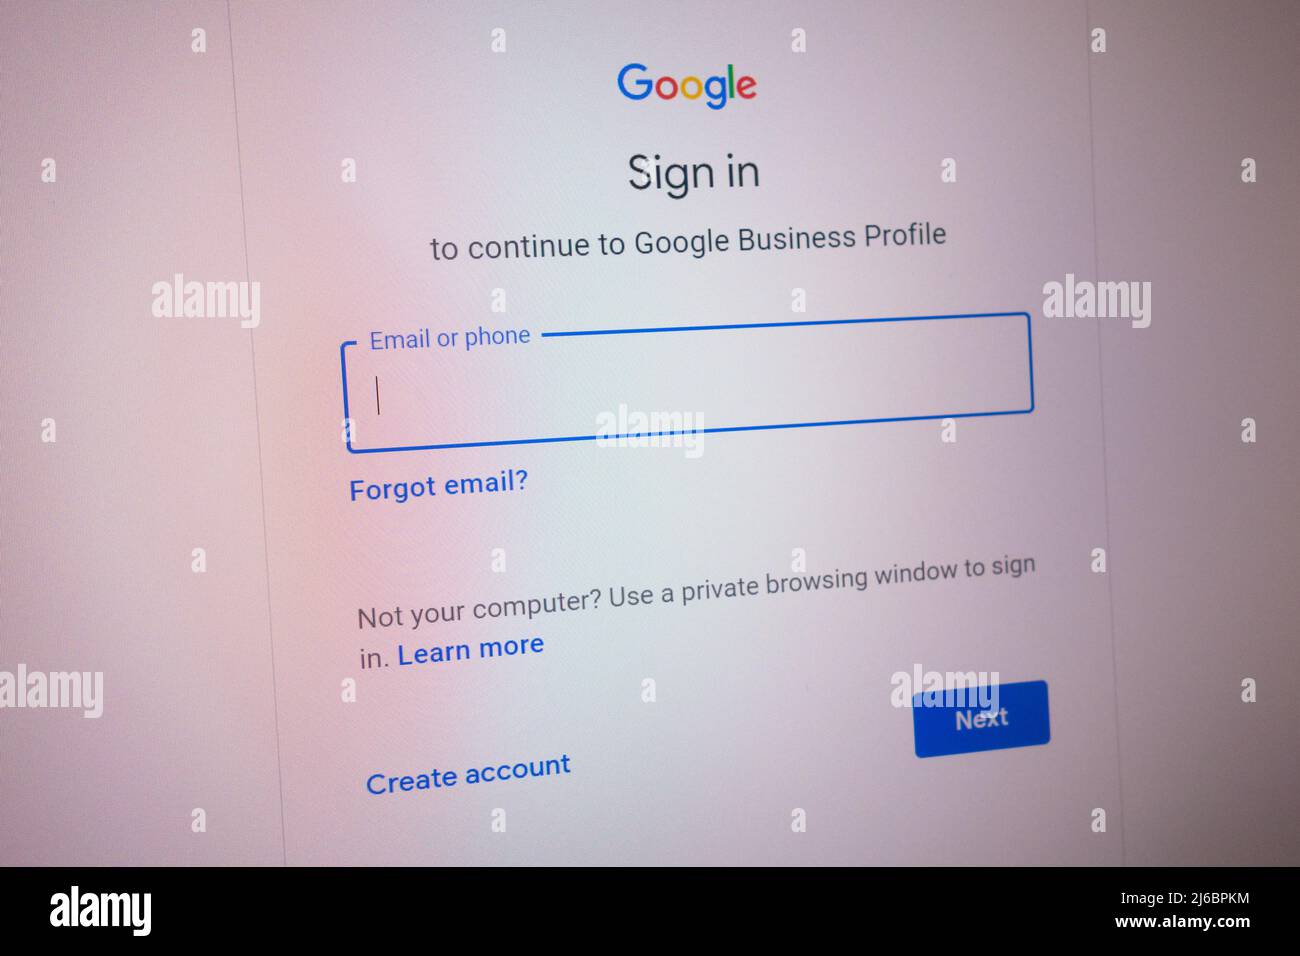 KONSKIE, POLAND - April 27, 2022: signing in to Google Business Profile by email or phone on laptop computer screen Stock Photo